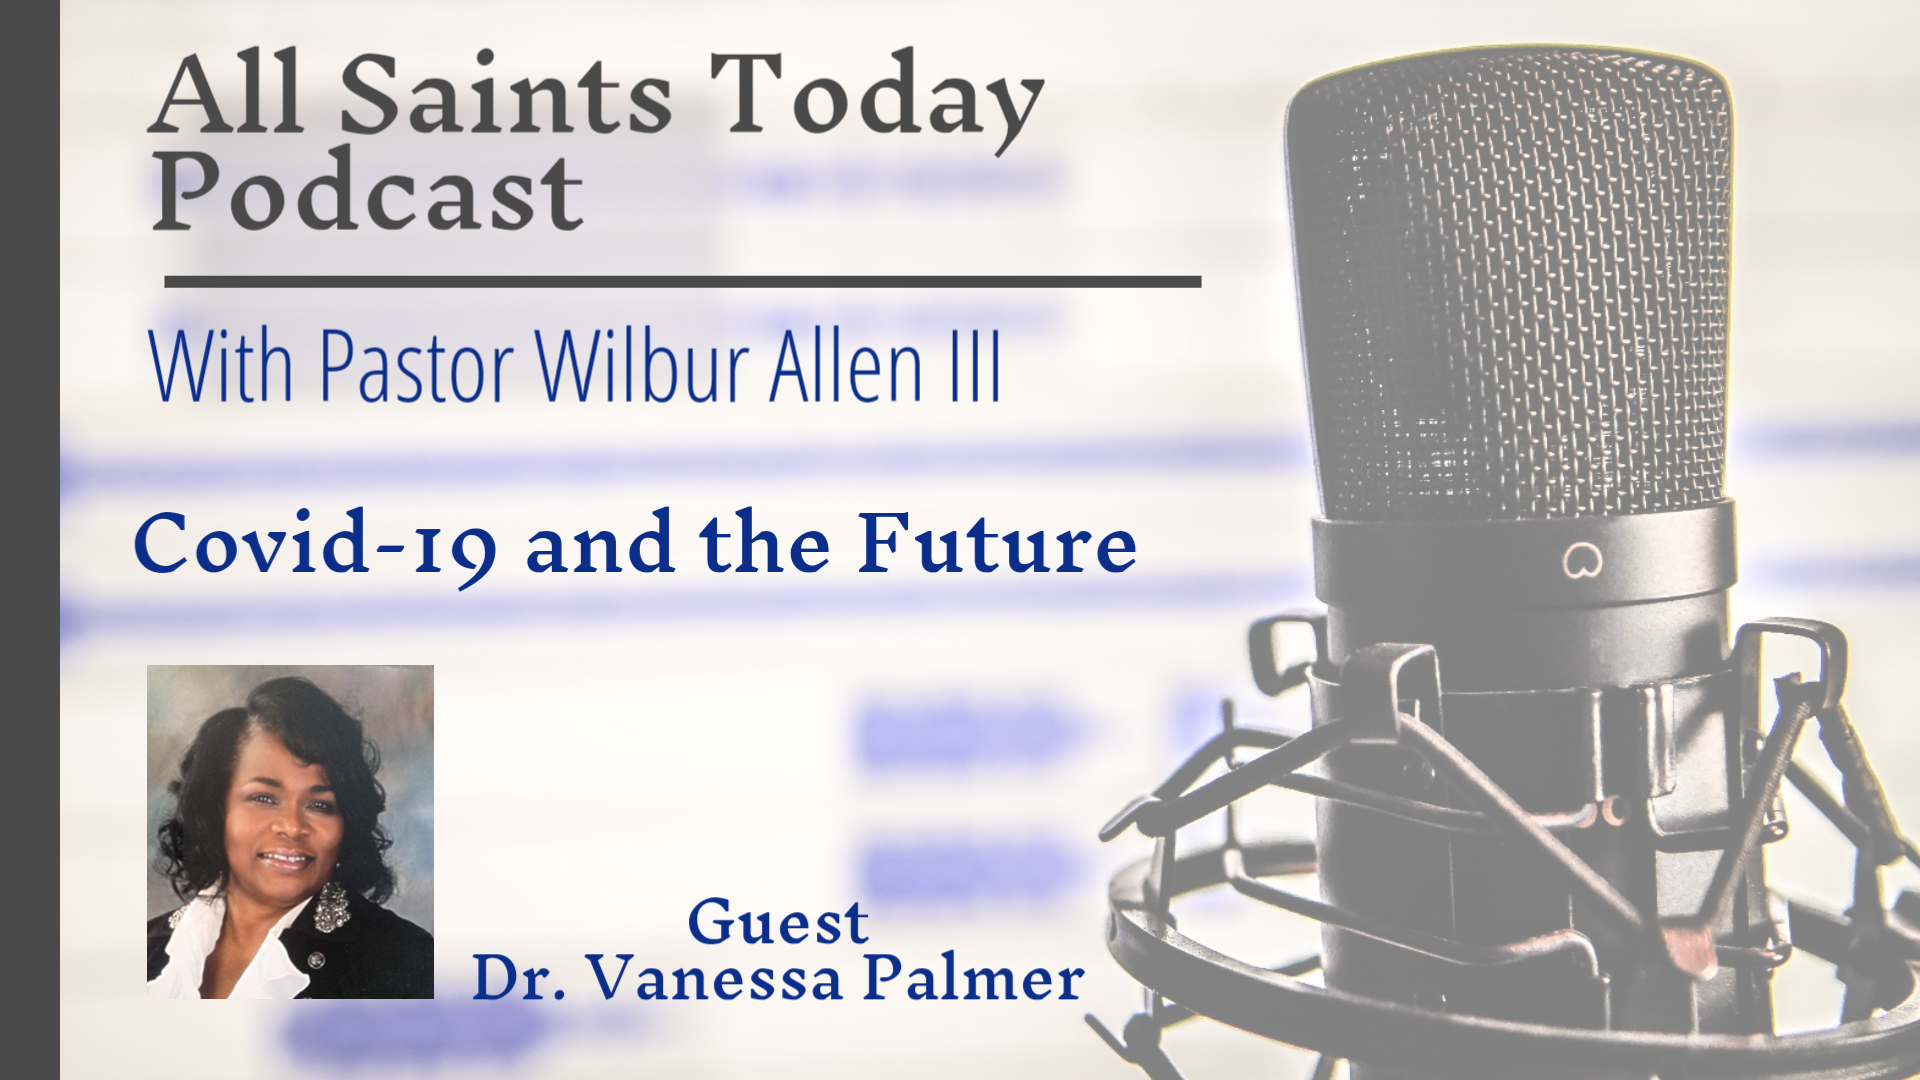 All Saints Today Podcast - Covid-19 and the Future